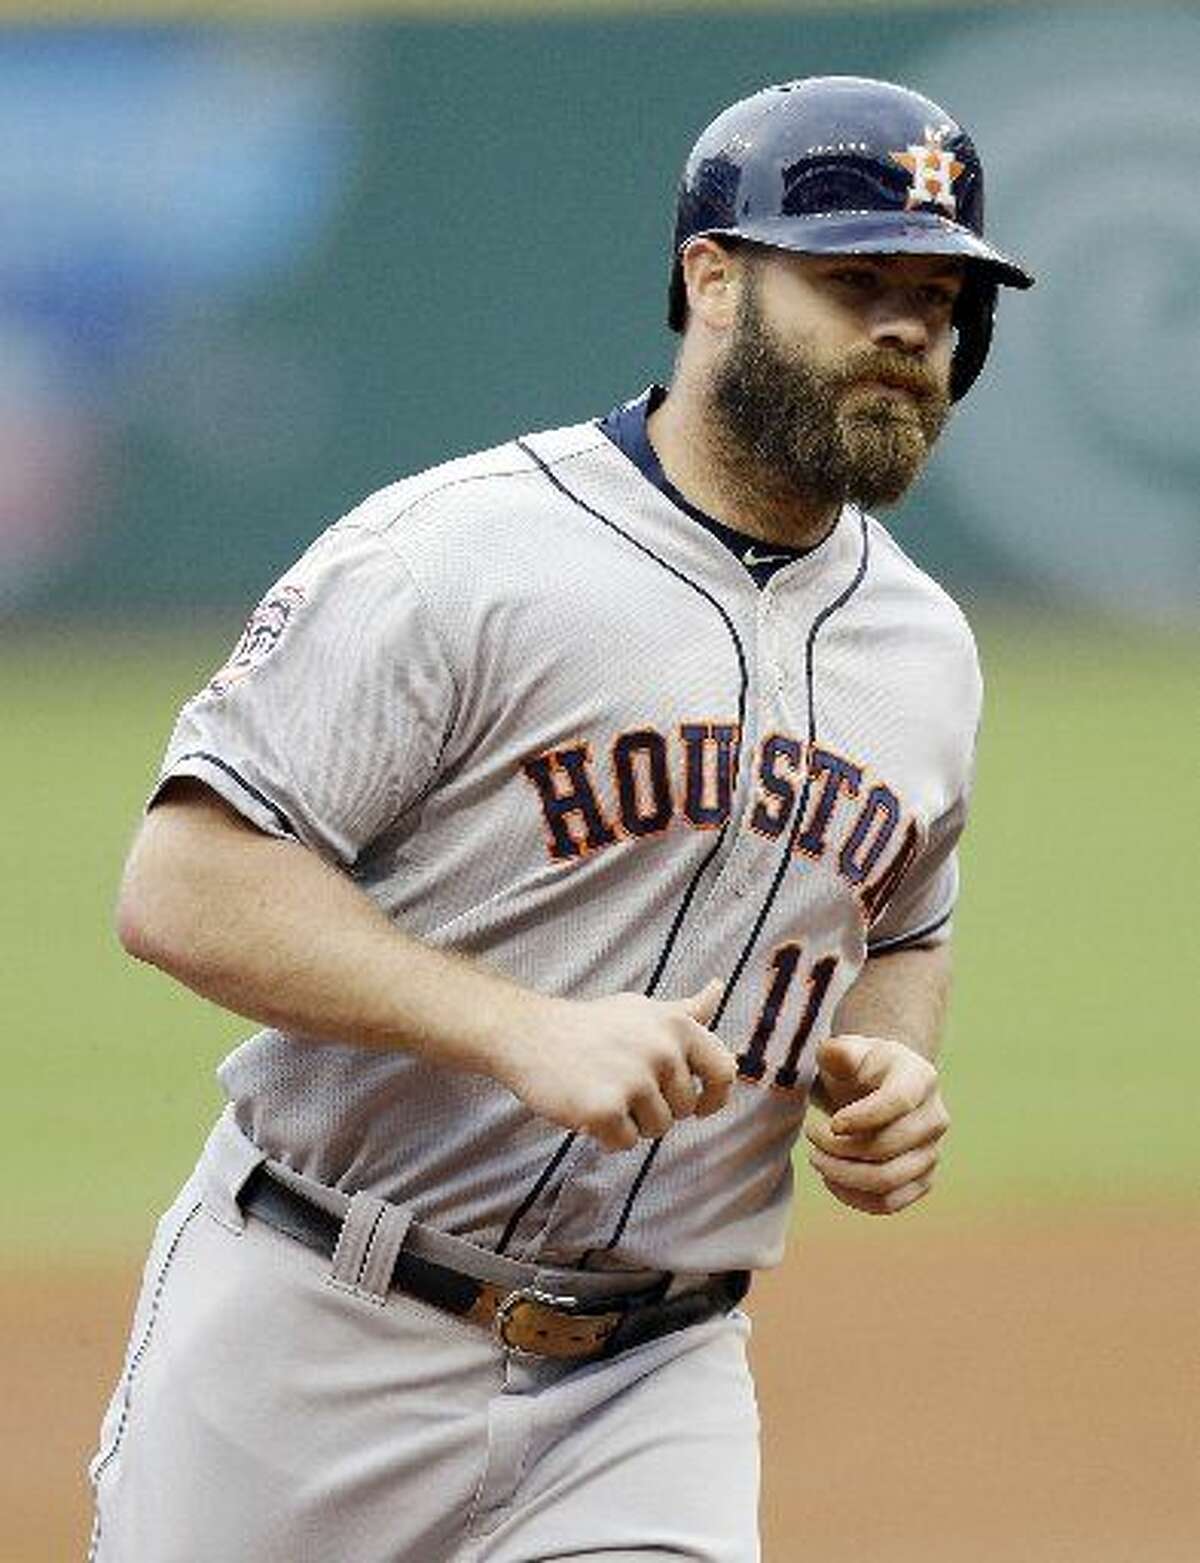 Houston Astros' Evan Gattis runs the bases after hitting a two-run home run off Cleveland Indians starting pitcher Trevor Bauer in the first inning of a baseball game, Wednesday, July 8, 2015, in Cleveland. Jose Altuve scored on the play. (AP Photo/Tony Dejak)